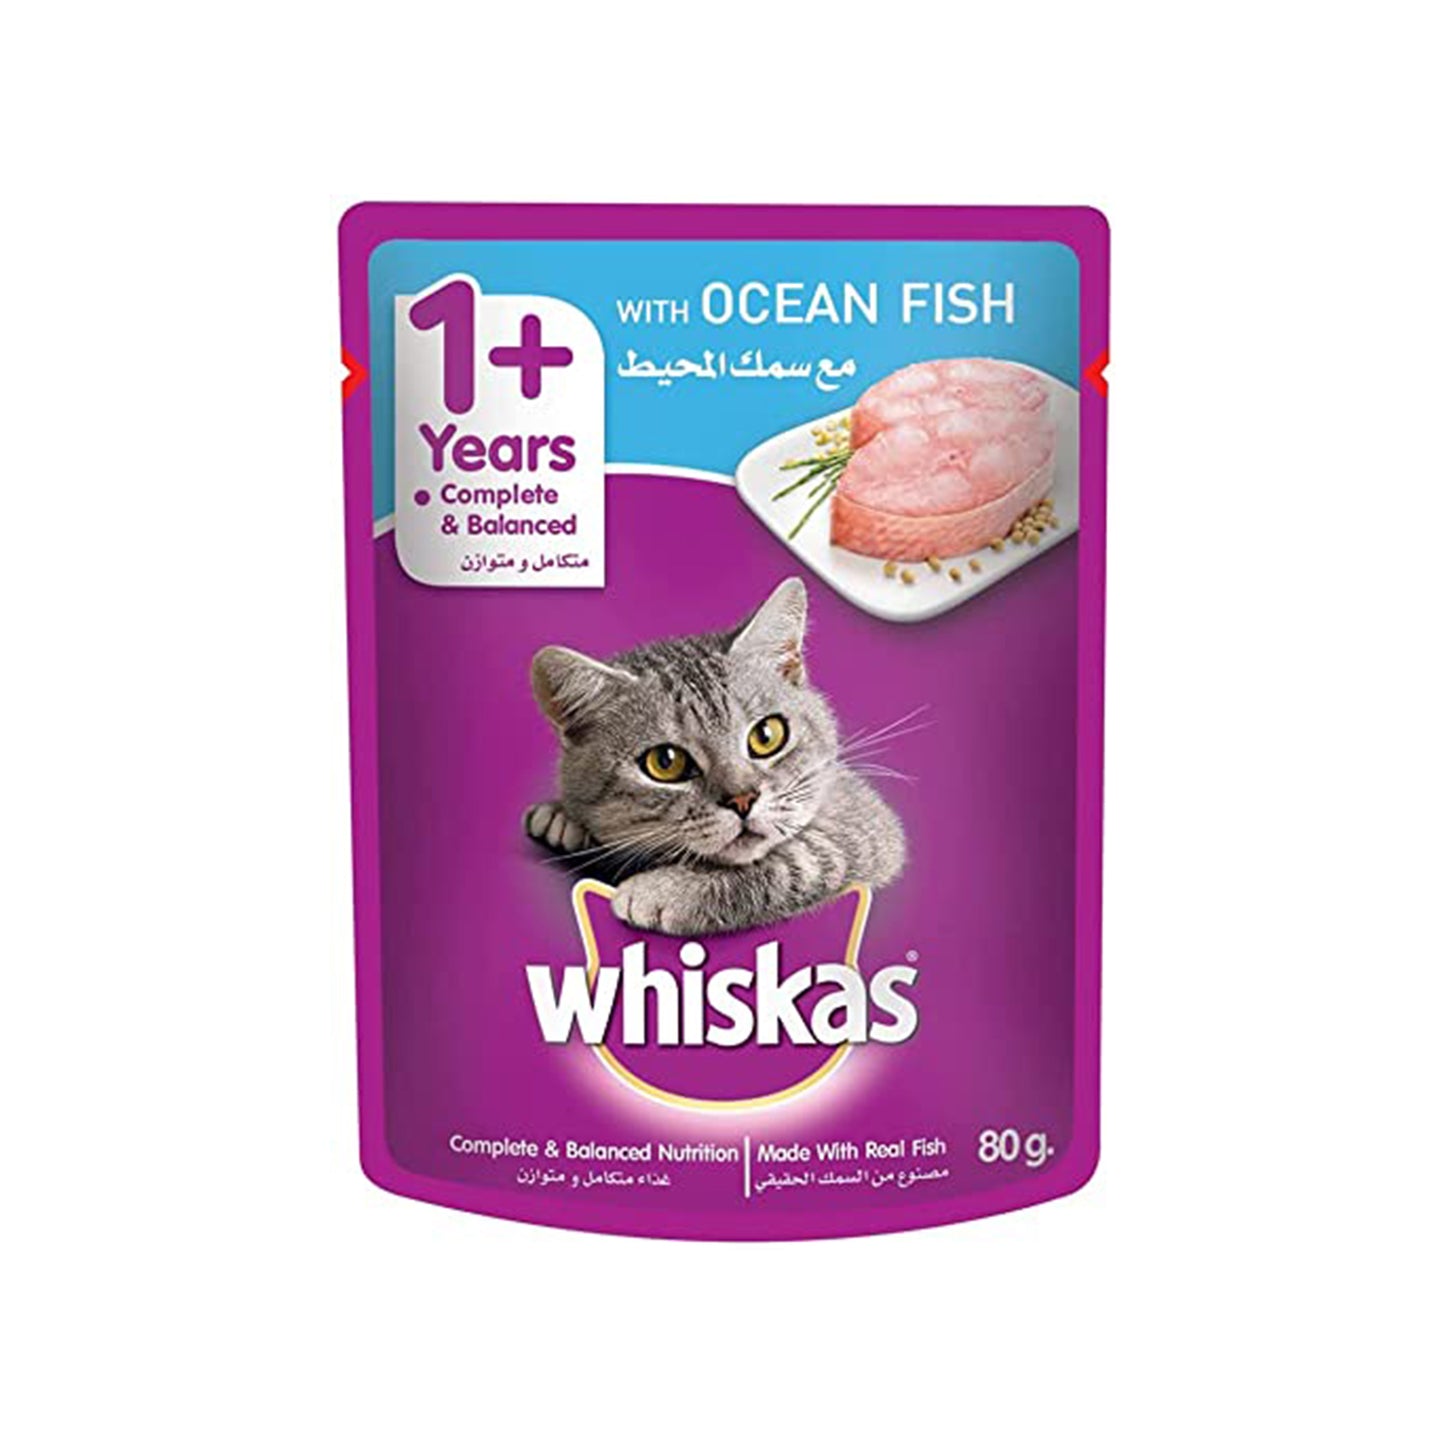 Whiskas - Wet Cat Food Ocean Fish For Cats (+1 year)